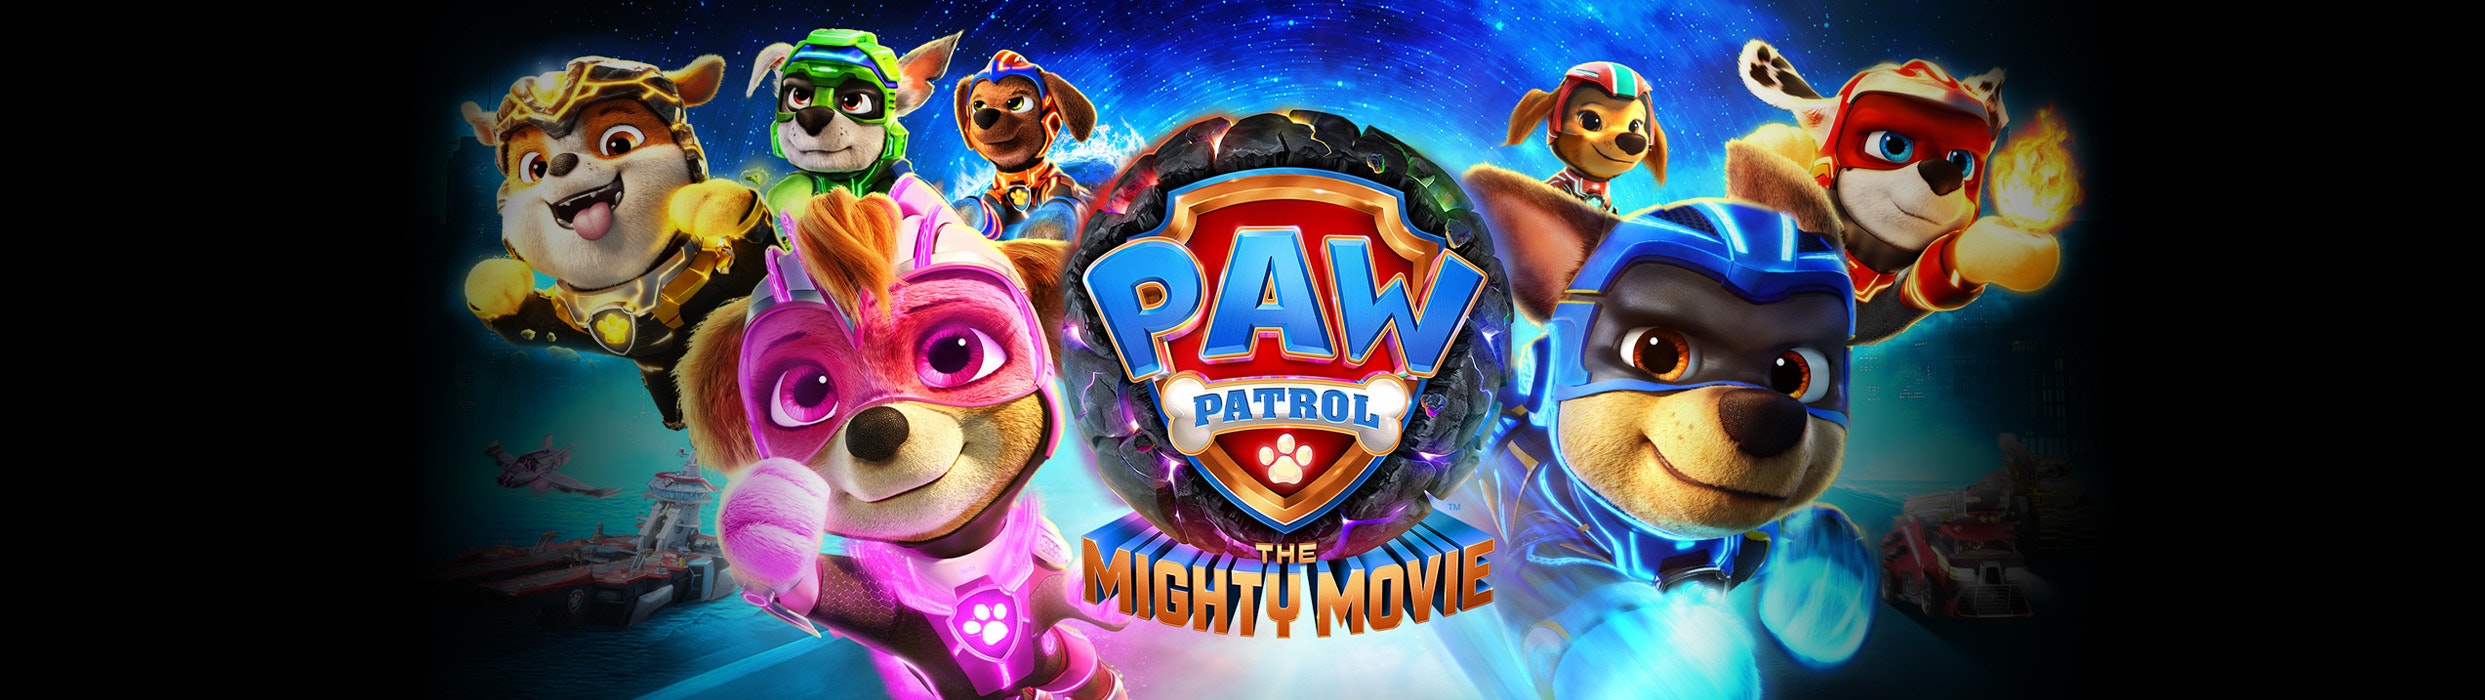 Animated super hero puppies fly to save the day in Paw Patrol: The Mighty Movie coming to Harkins September 29! Get your tickets at Harkins today!